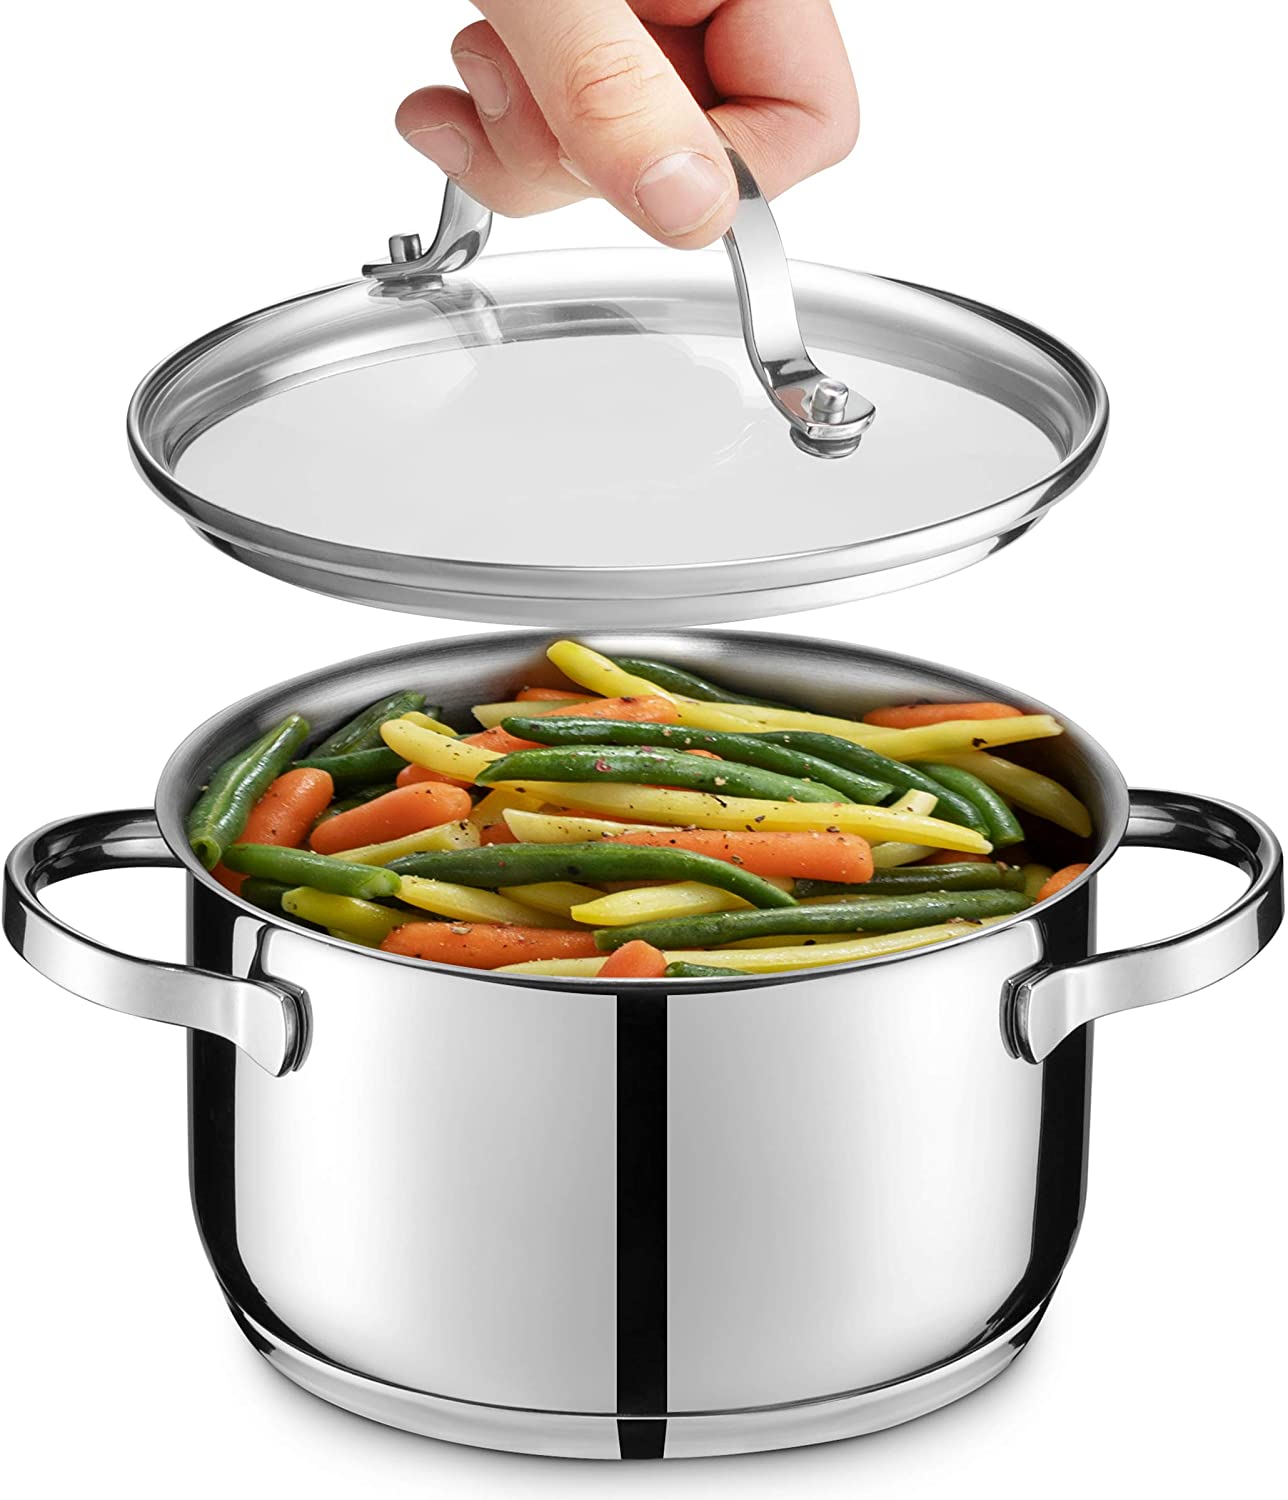 GOURMEX 1.8L Small Induction Casserole Stainless Steel Pot with Glass Cookware Lid